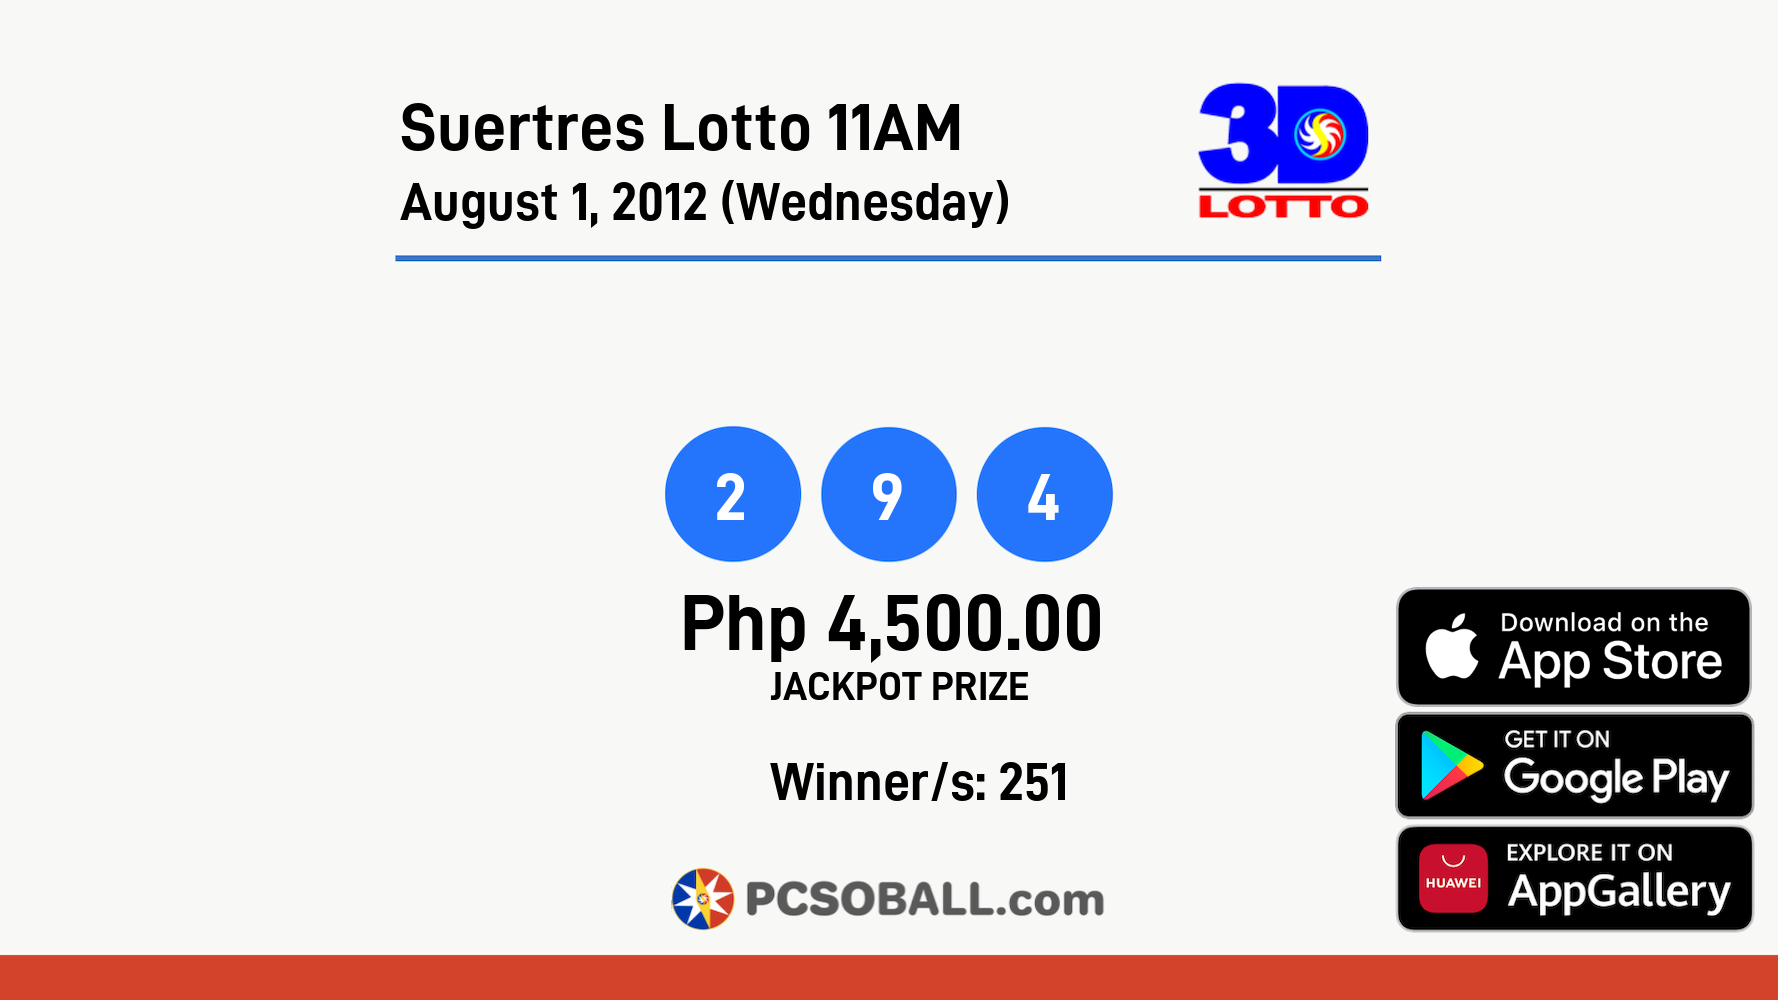 Suertres Lotto 11AM August 1, 2012 (Wednesday) Result